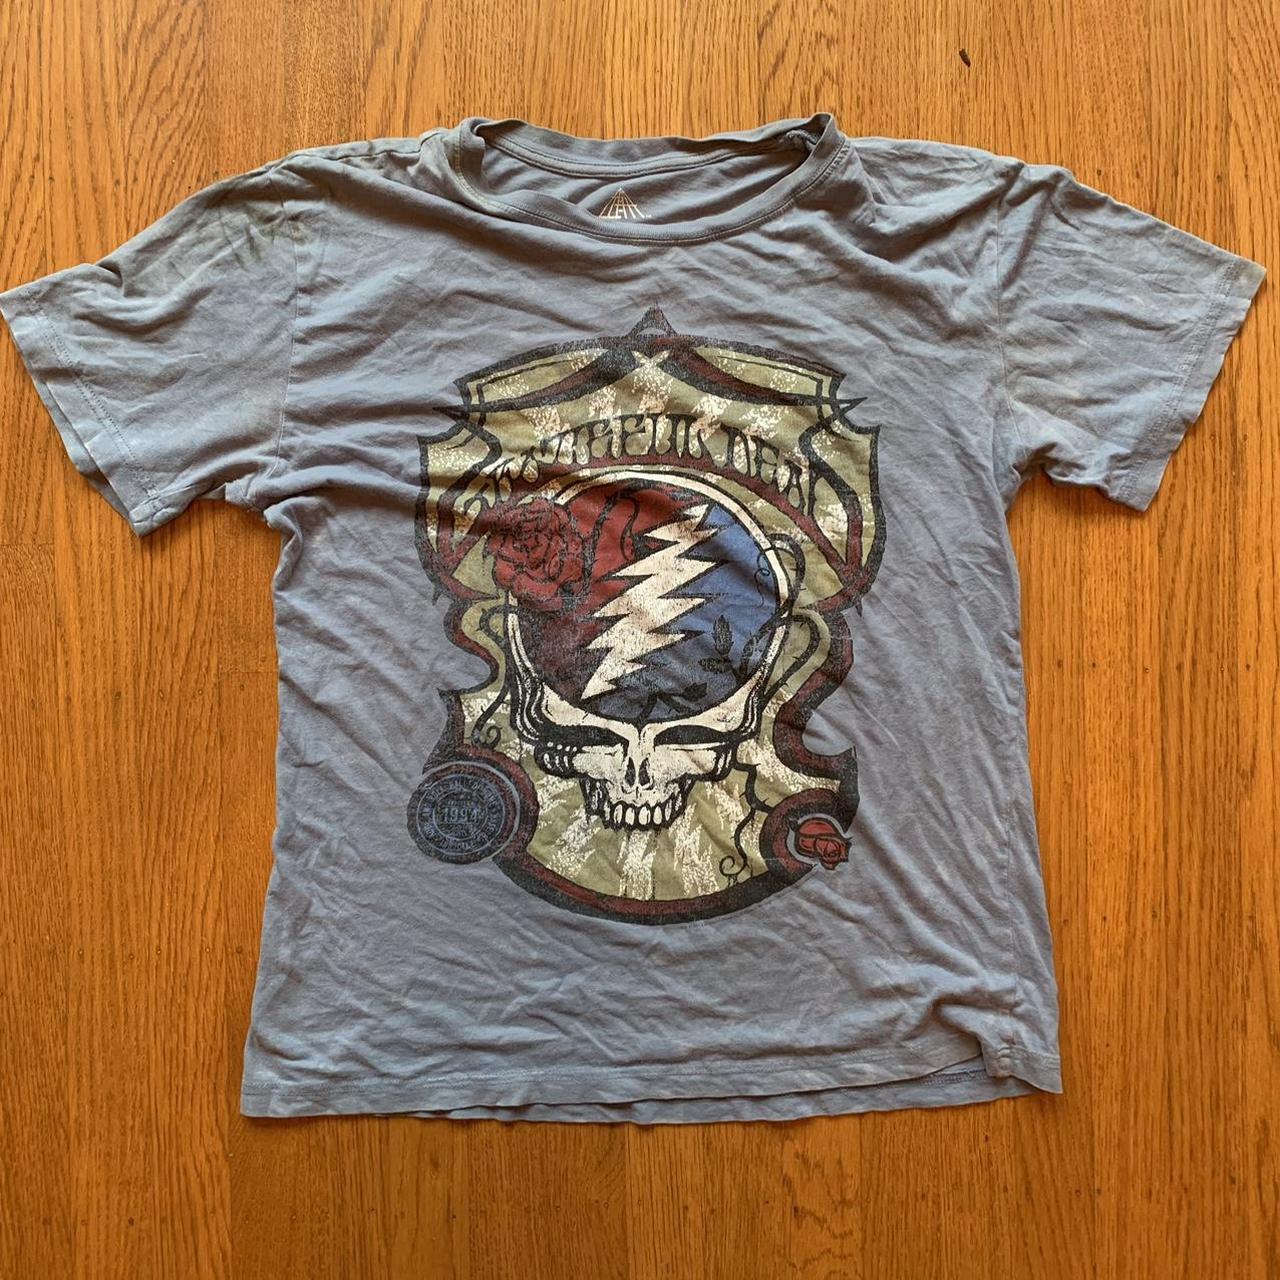 The Grateful Dead  Rock & Roll Hall of Fame